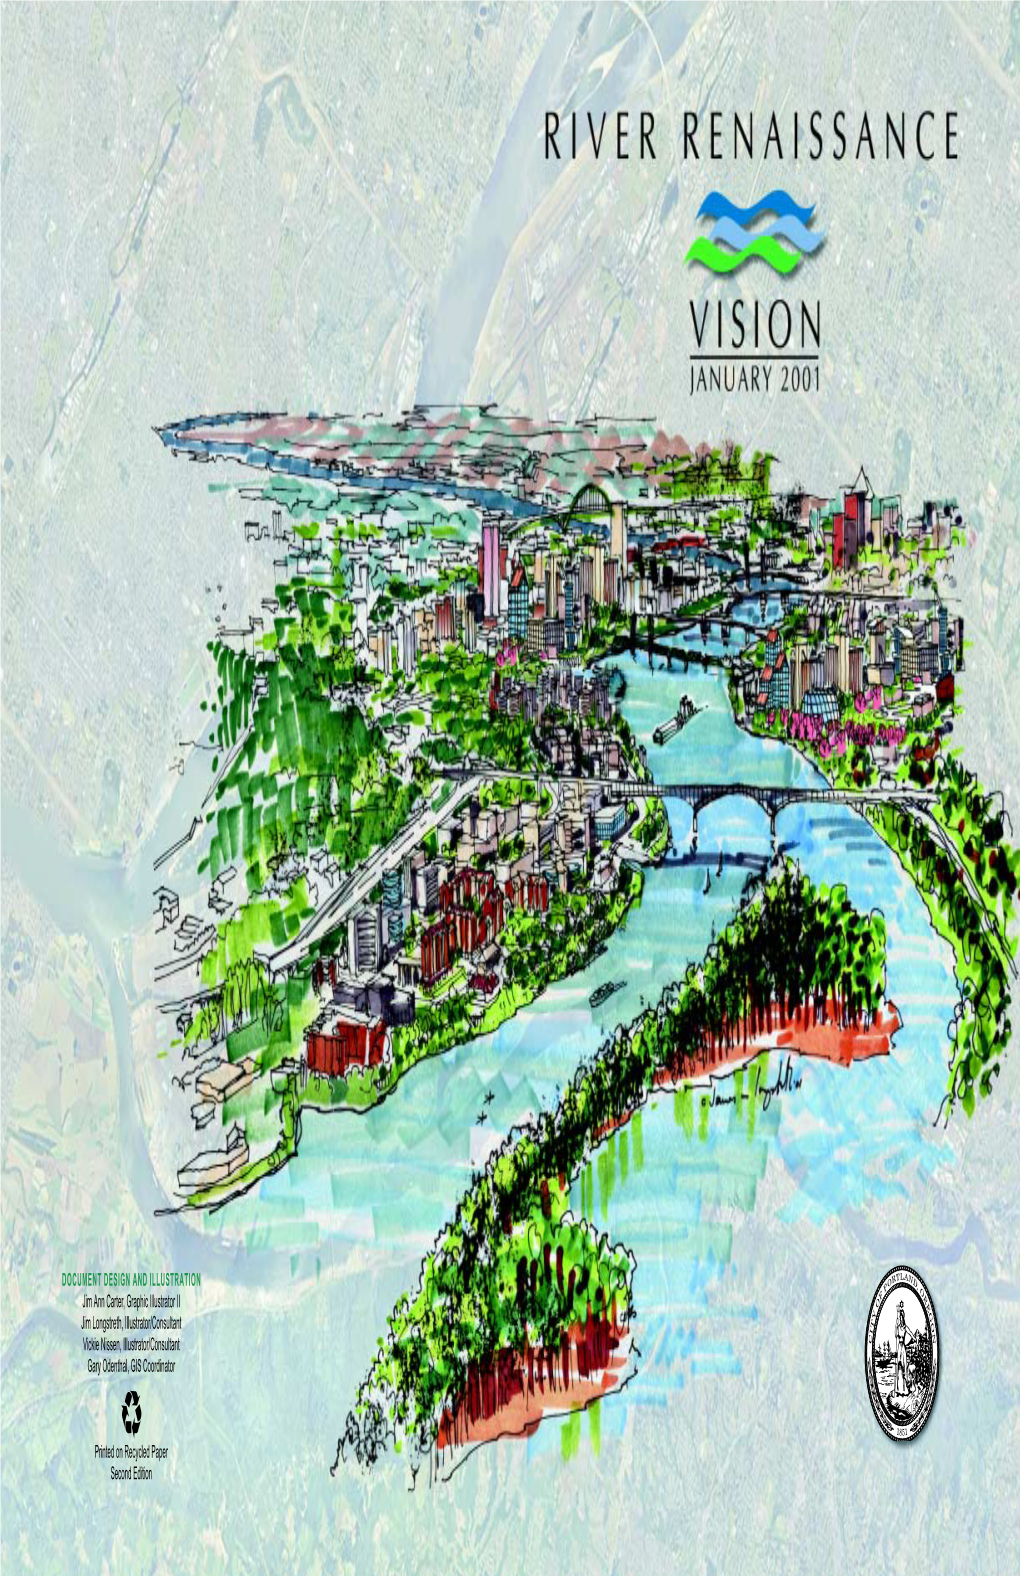 River Renaissance Vision Is a Sketch of the Willamette River As Portlanders Would Like to See It in the Future